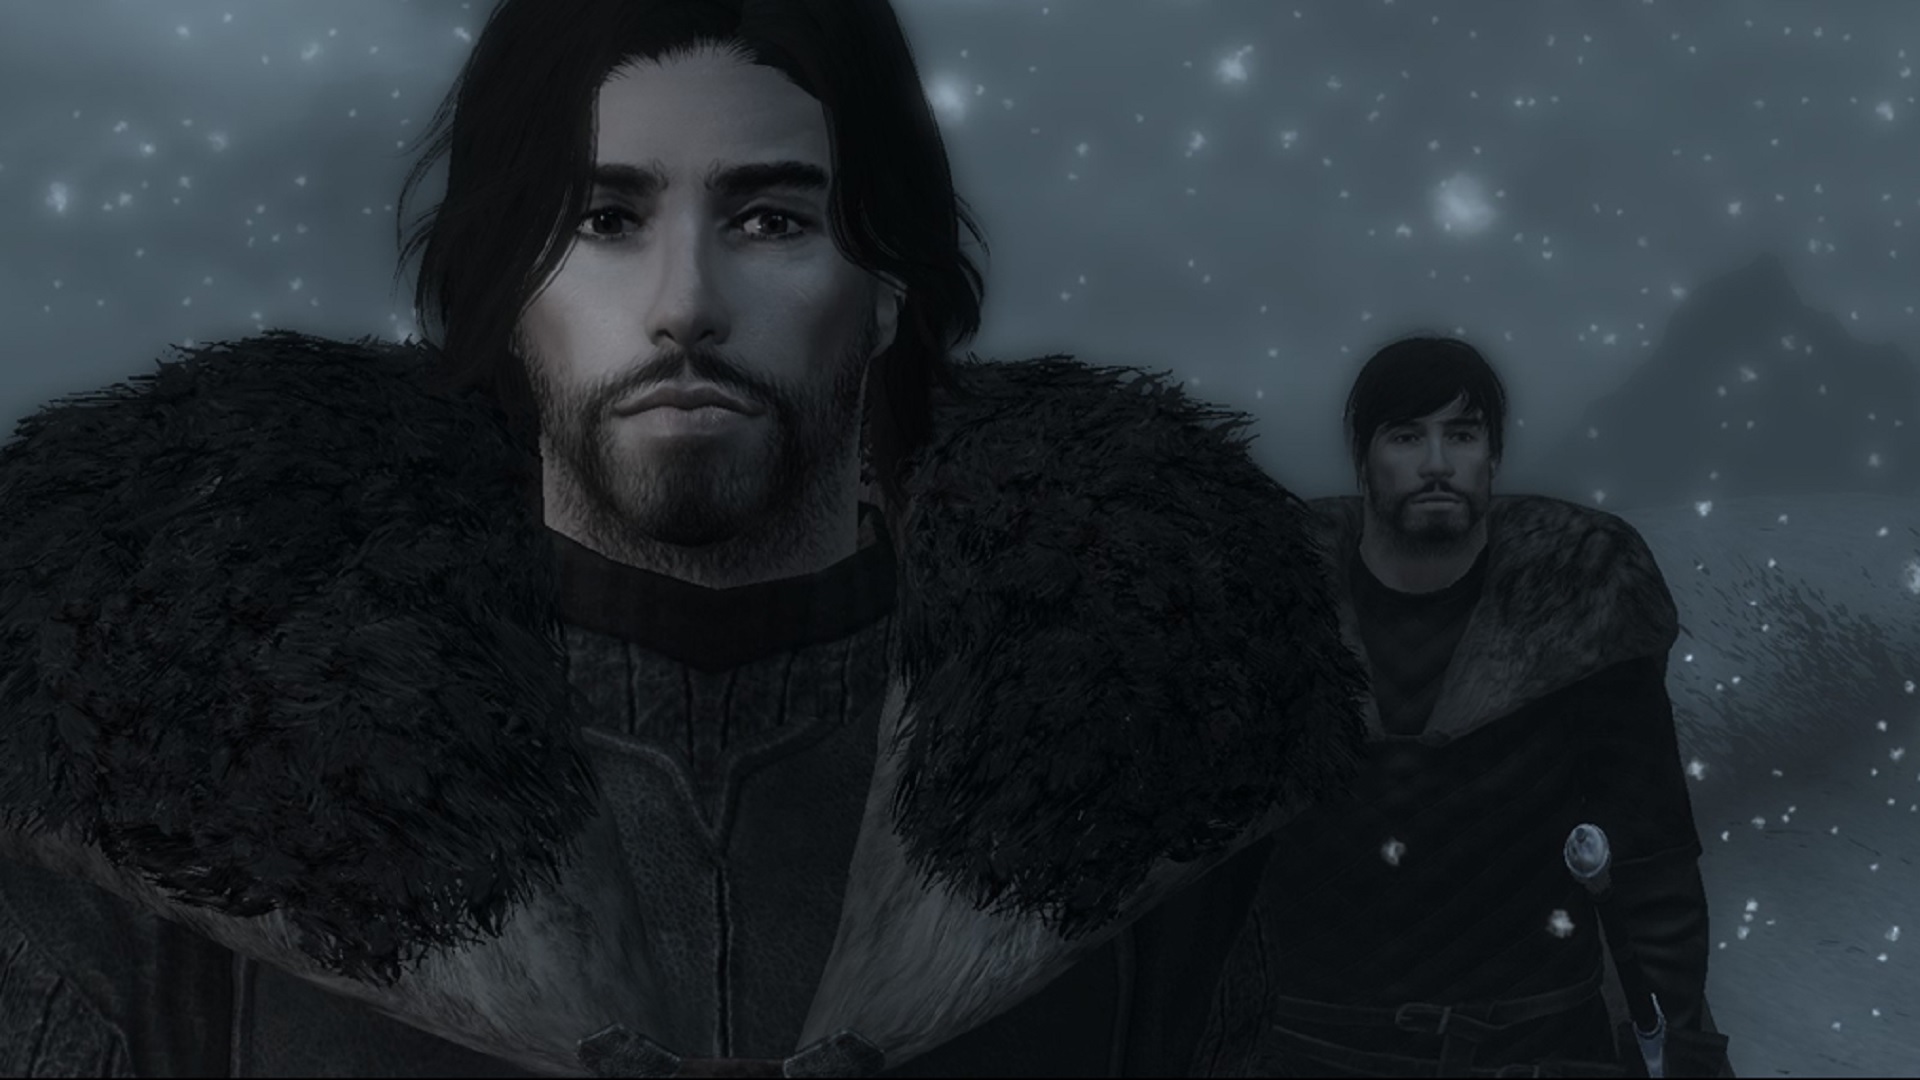 Best Game of Thrones games: Skyrim. Image shows a character in woolen clothes in a dark place.